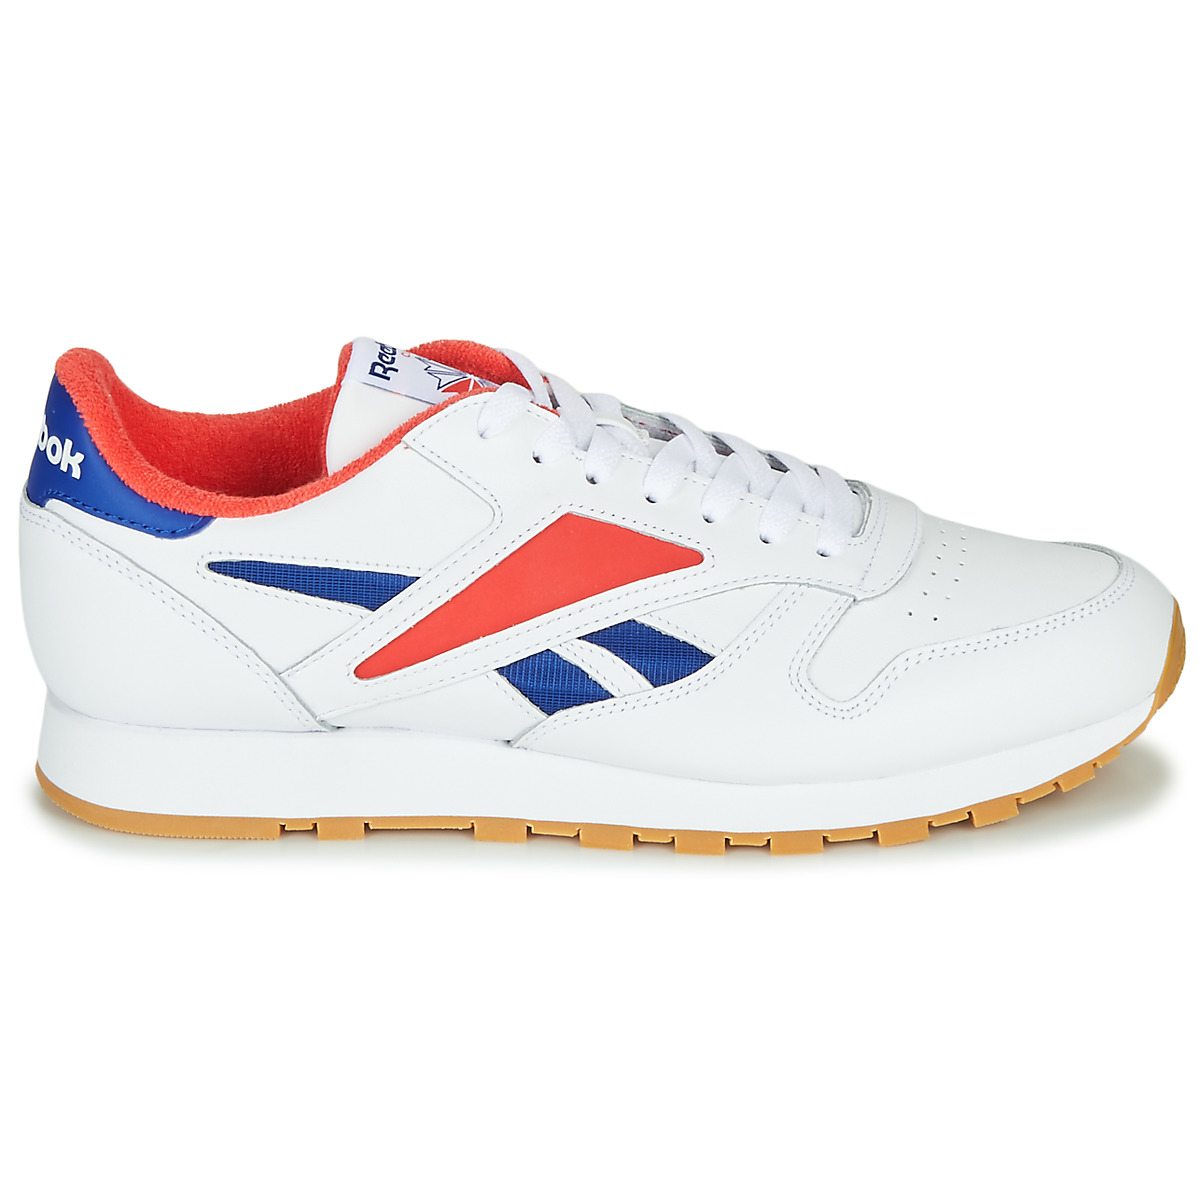 Reebok Classic Gris / Blanc / Rouge CL LEATHER MARK Vykxur1y